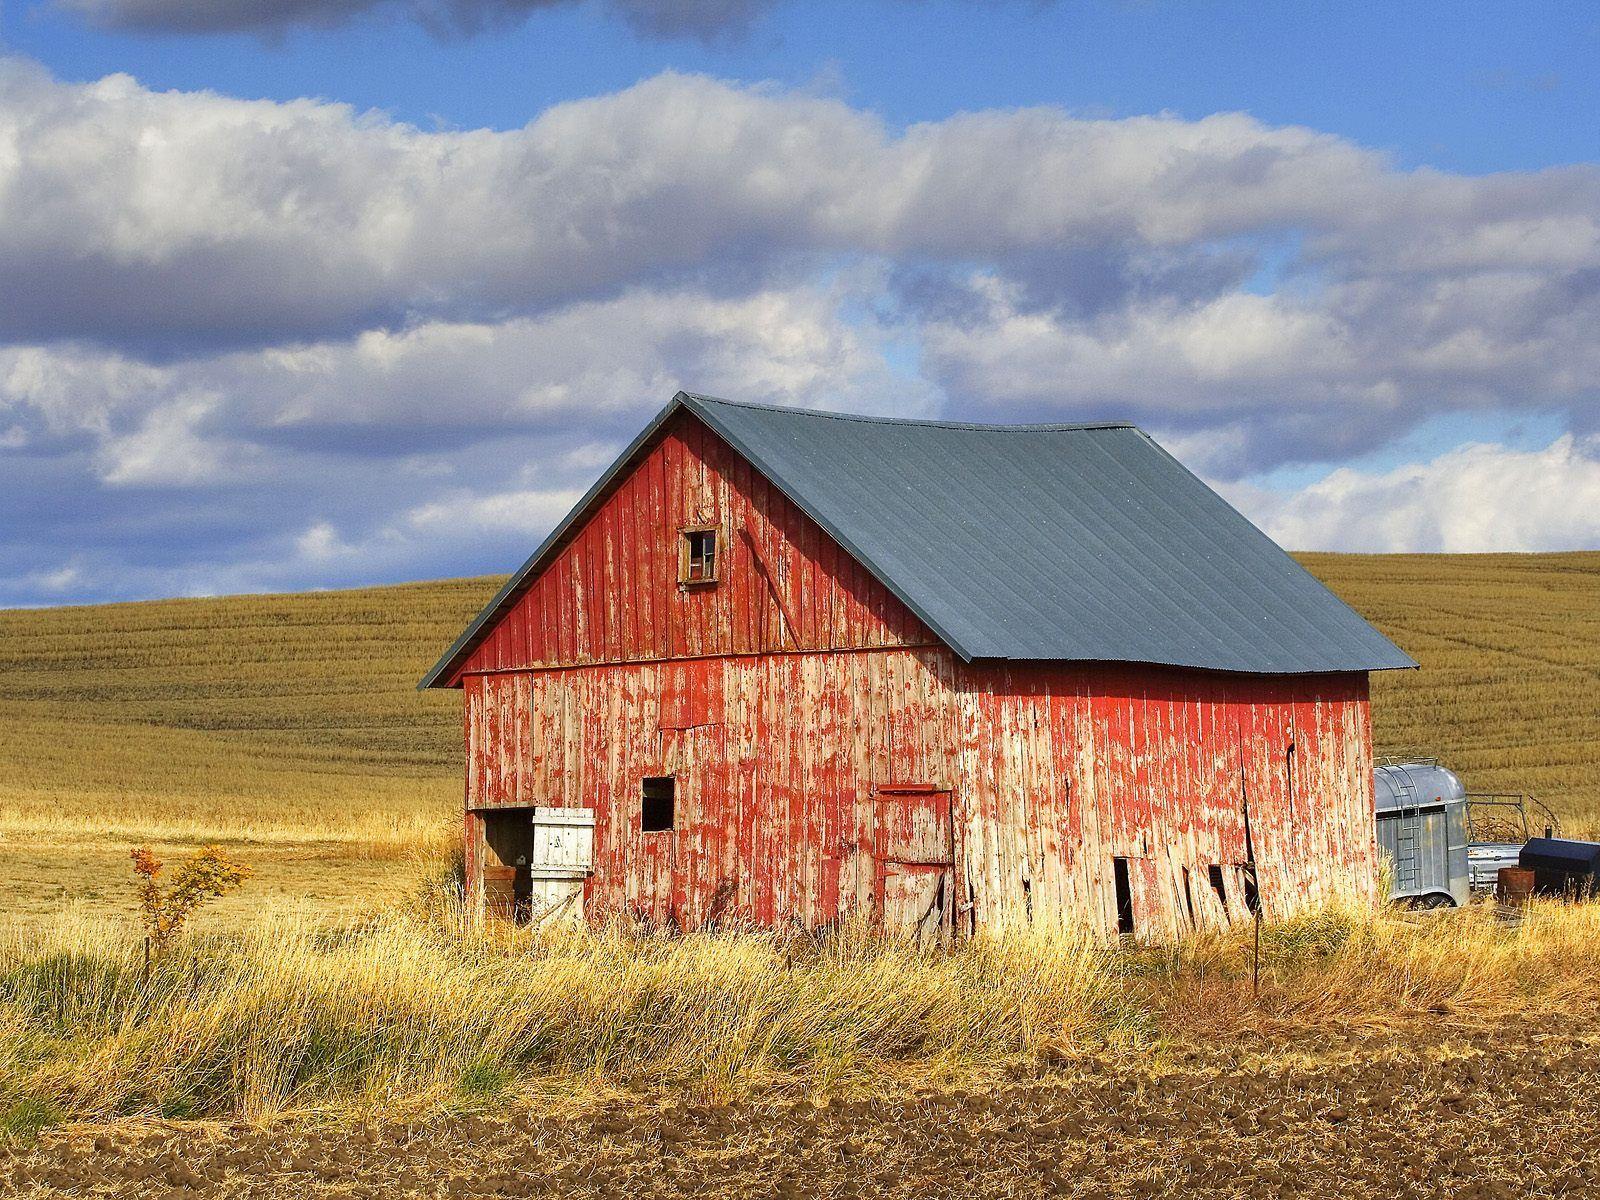 free image to paint on old windows. Nature: Old Red Barn, Palouse, Washington, picture nr. 40448. Red barn, Old barn doors, Old barn